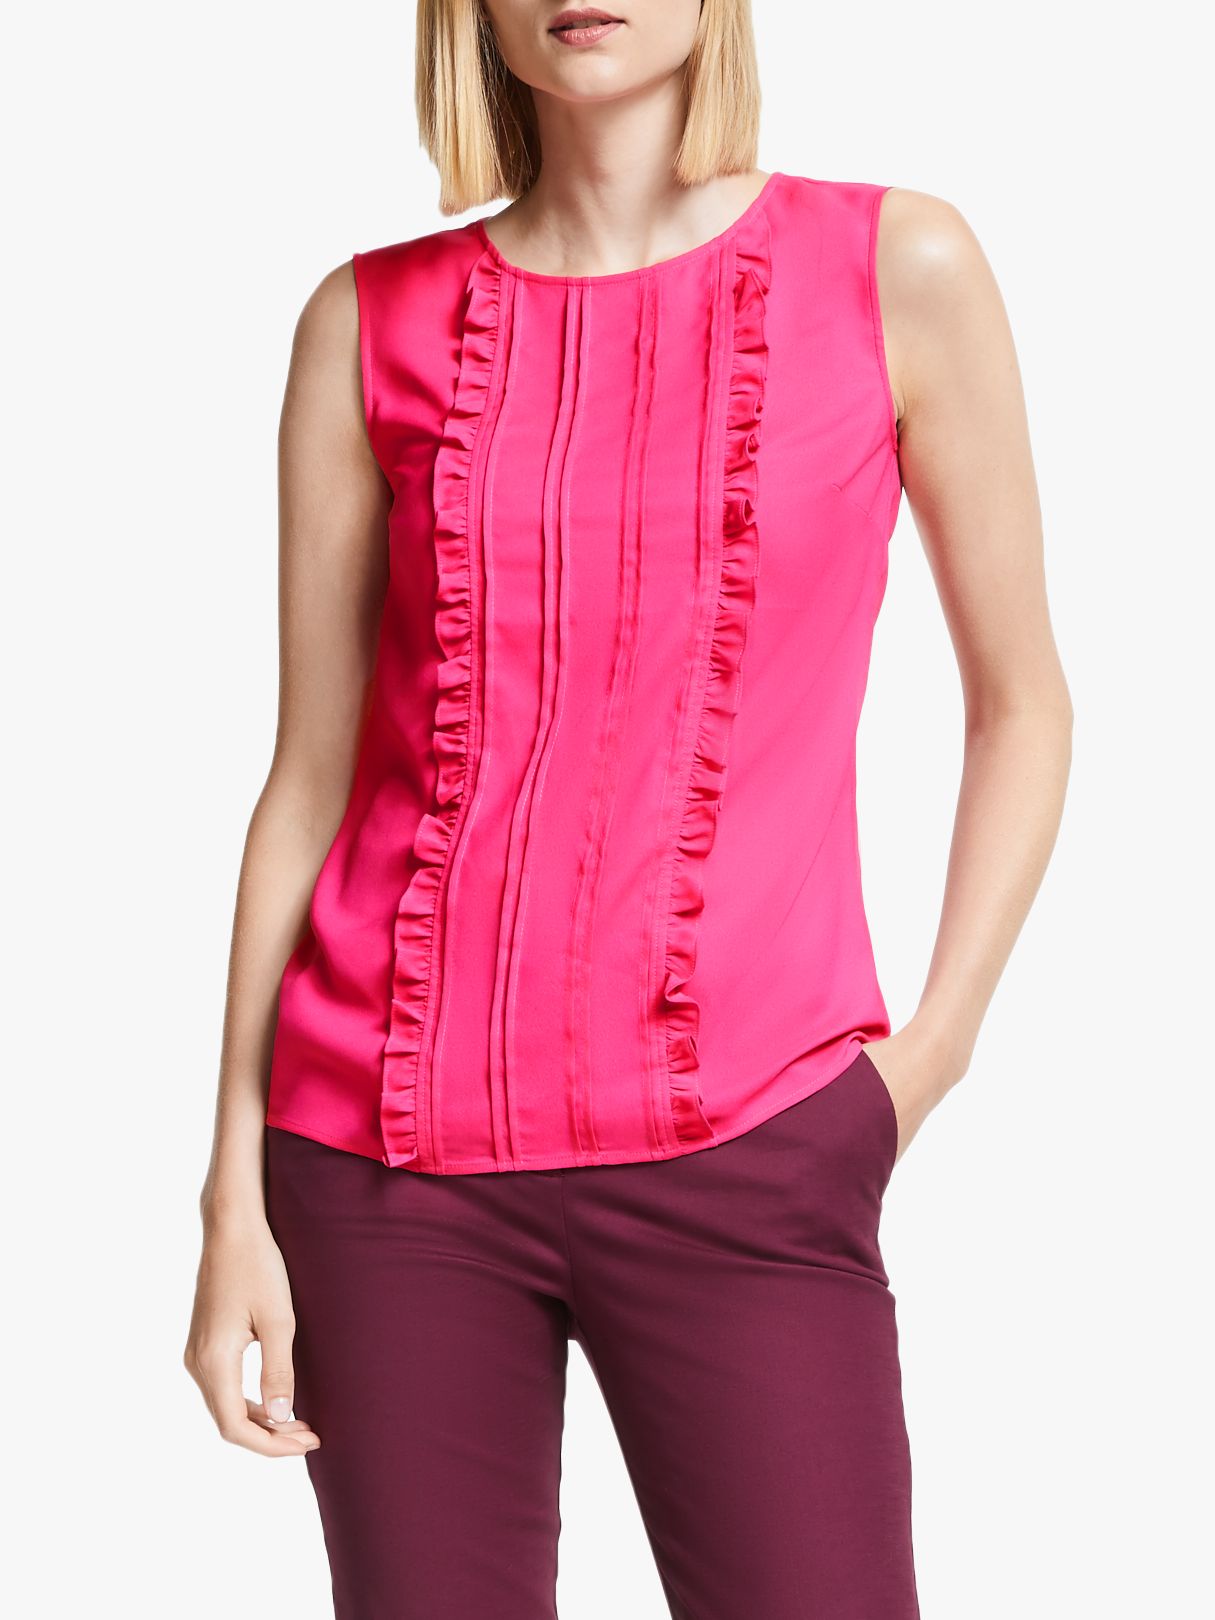 Boden Penny Ruffle Top, Party Pink at John Lewis & Partners